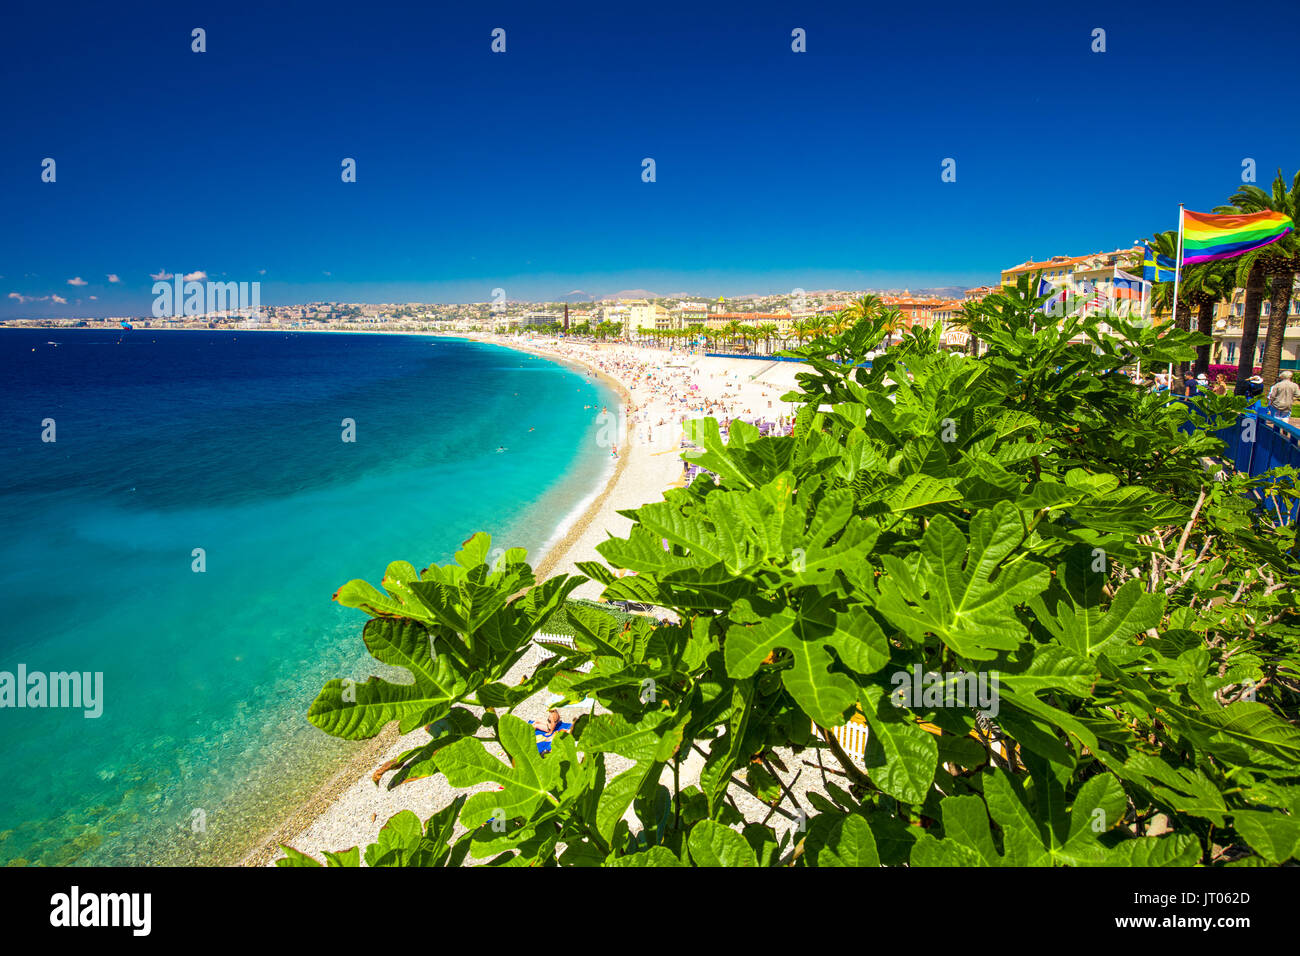 Beach promenade in old city center of Nice, French riviera, France, Europe. Stock Photo